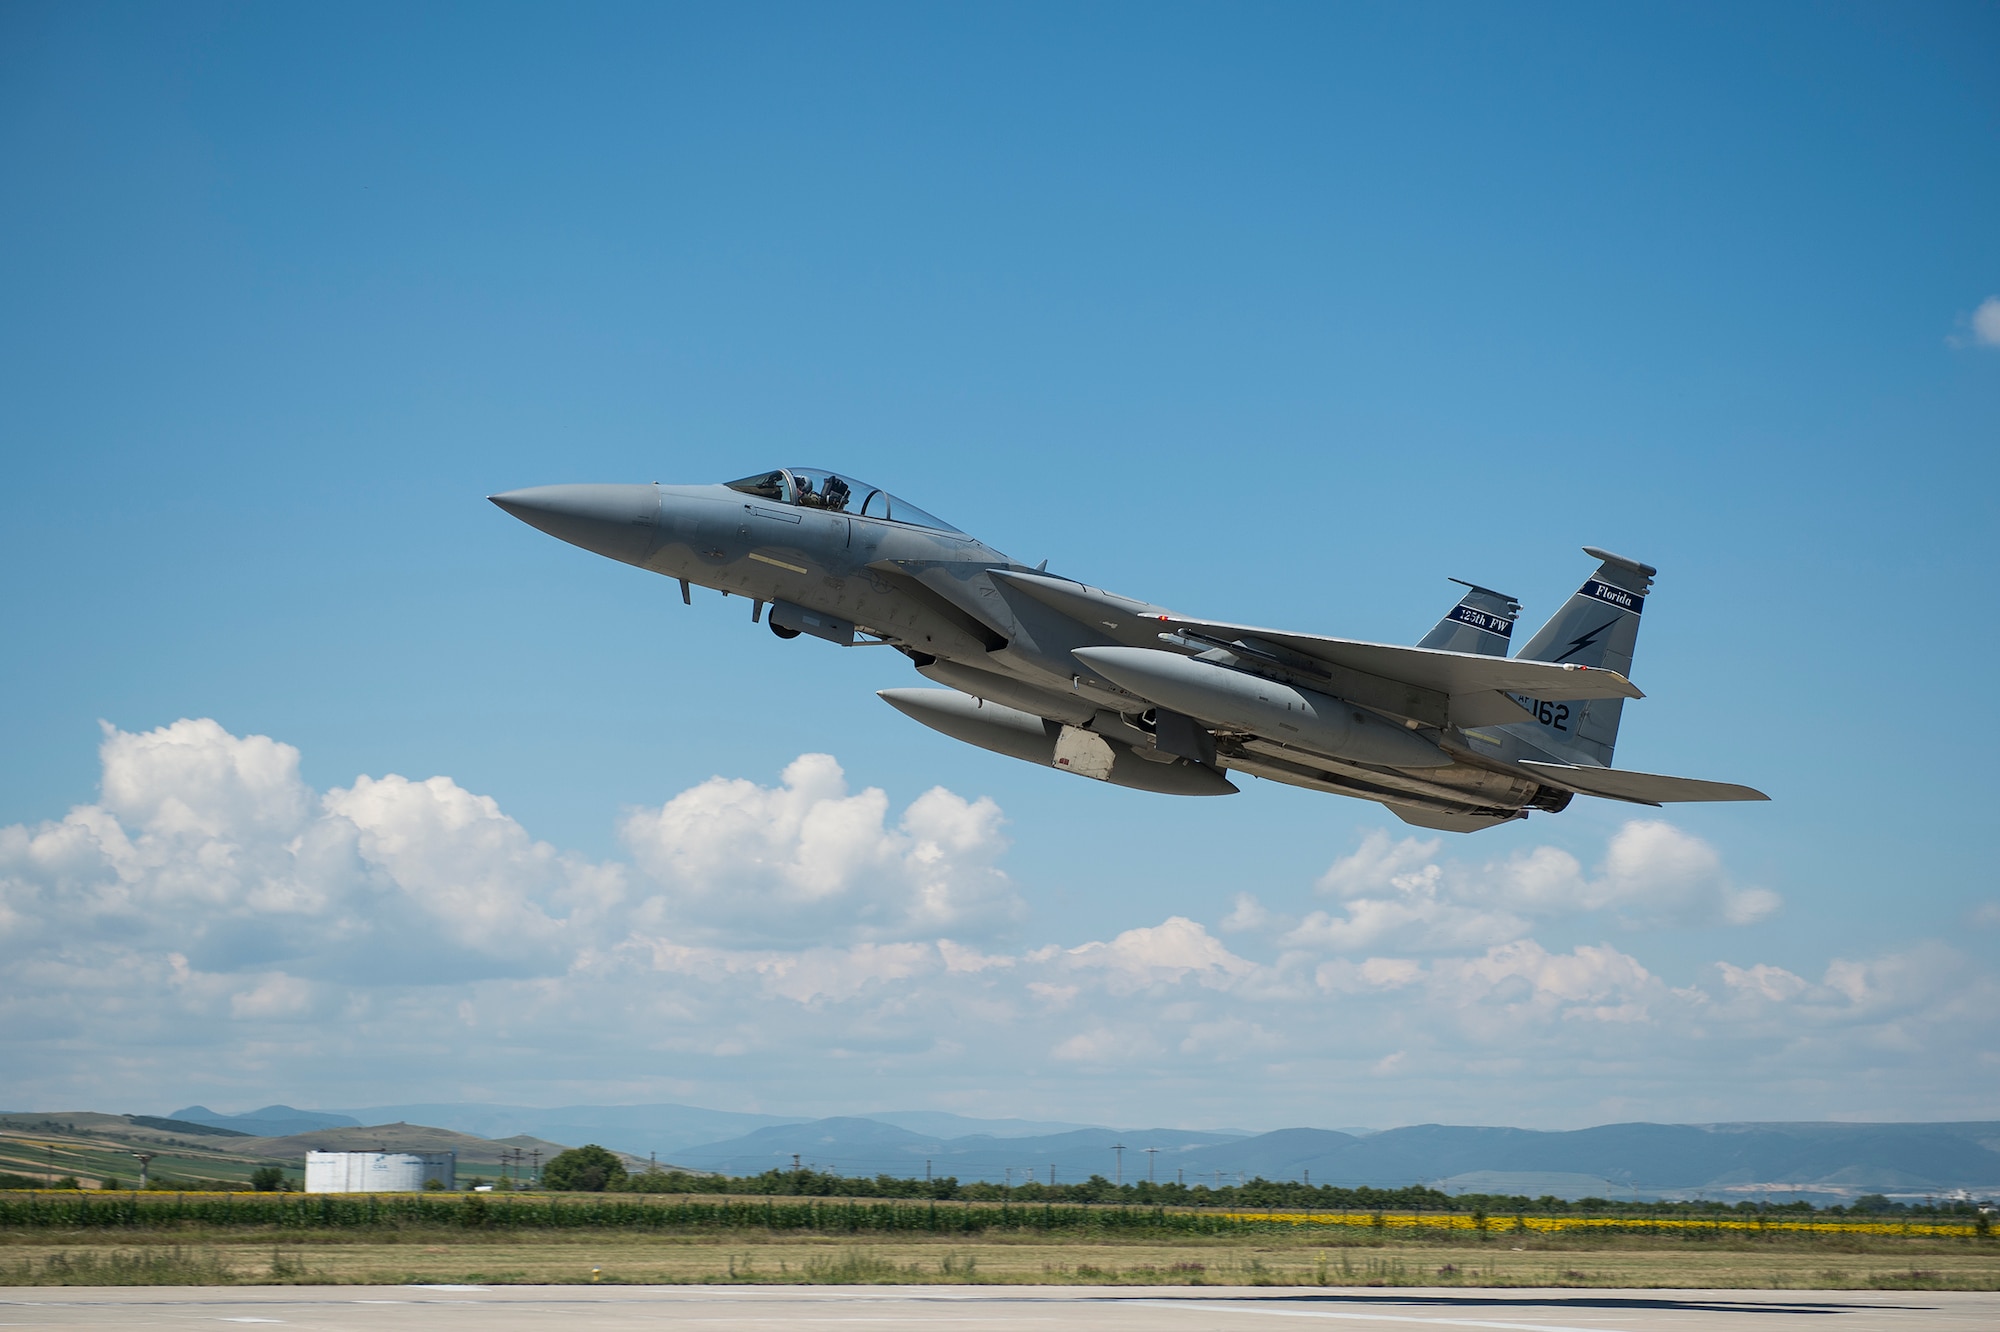 An F-15C Eagle fighter aircraft from the 159th Expeditionary Fighter Squadron takes off from Campia Turzii, Romania, July 18, 2017. The squadron is in Romania in support of Operation Atlantic Resolve, an ongoing operation meant to enhance the security of Europe and bolster partnership between NATO allies. (U.S. Air Force photo by Tech. Sgt. Chad Warren)